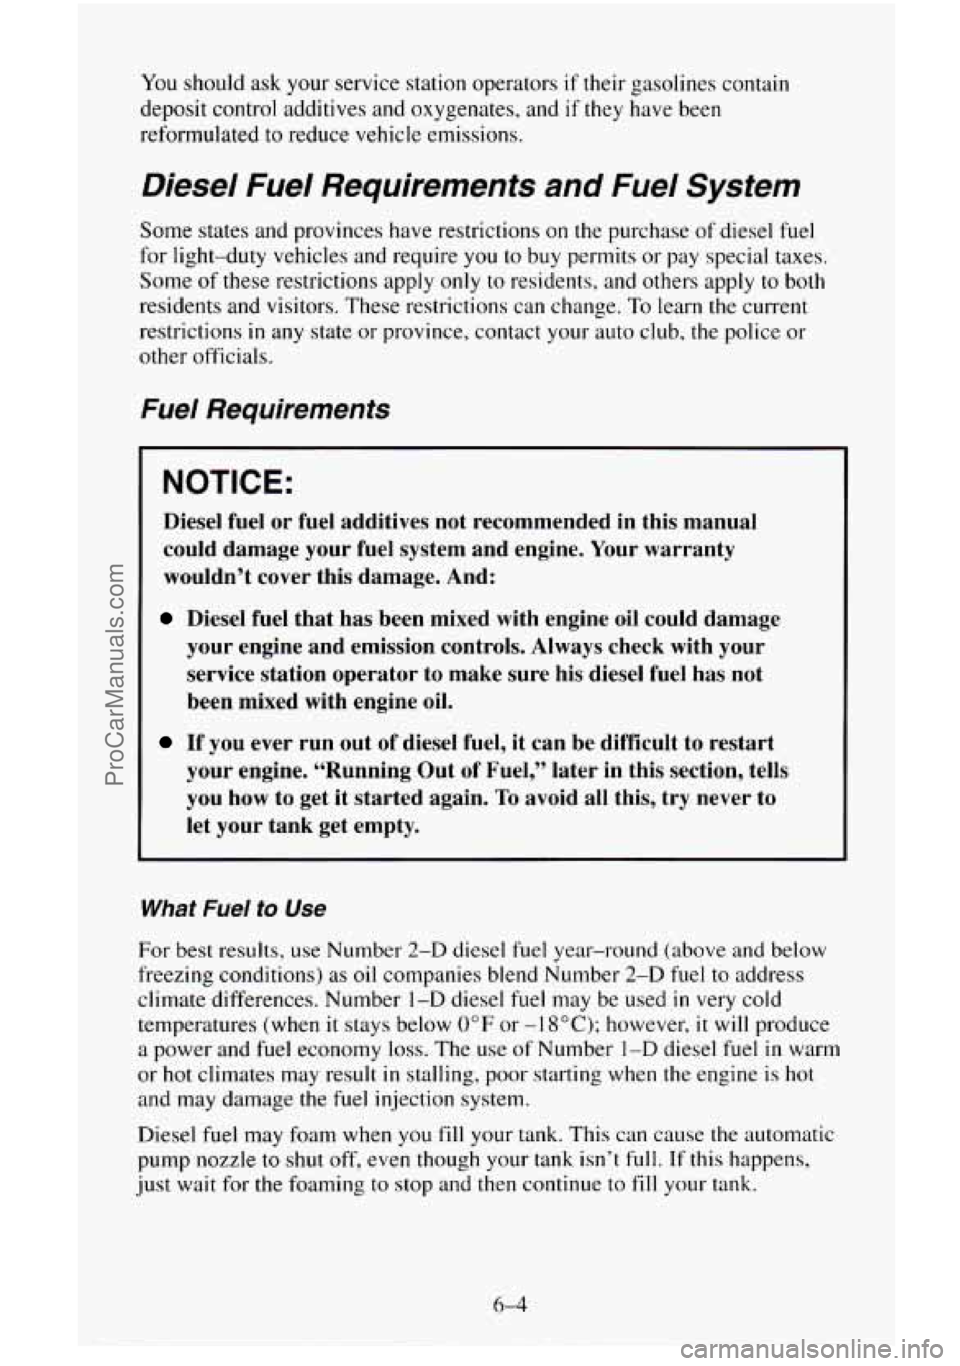 CHEVROLET SUBURBAN 1995  Owners Manual You should ask your  service  station operators if their gasolines contain 
deposit  control additives  and oxygenates, and 
if they have  been 
reformulated 
to reduce vehicle emissions. 
Diesel  Fue